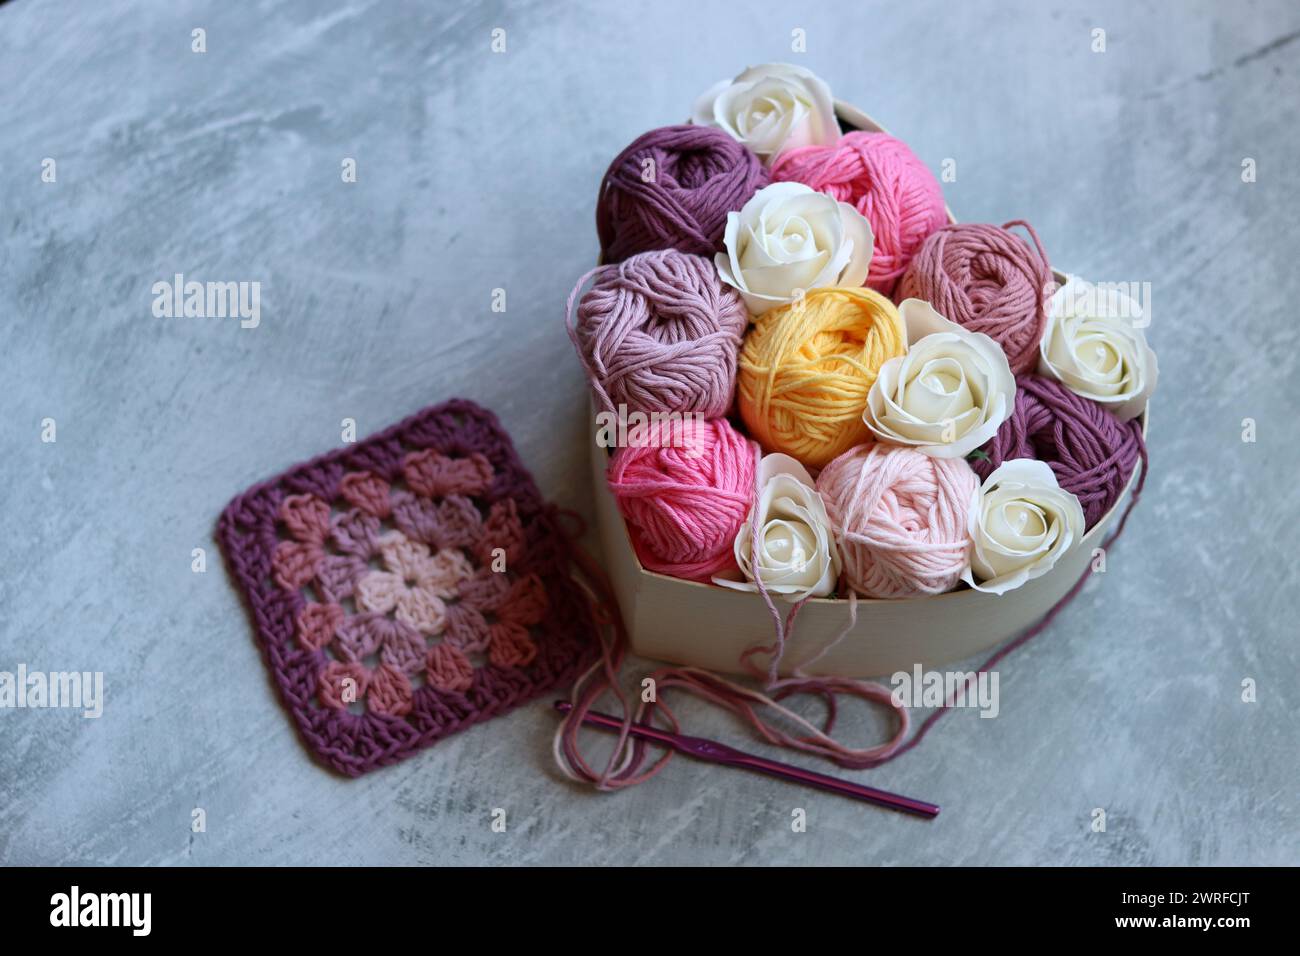 Heart-shaped box with white roses and cotton yarn on a gray background. Cotton yarn texture close up photo. Art and craft concept. Stock Photo